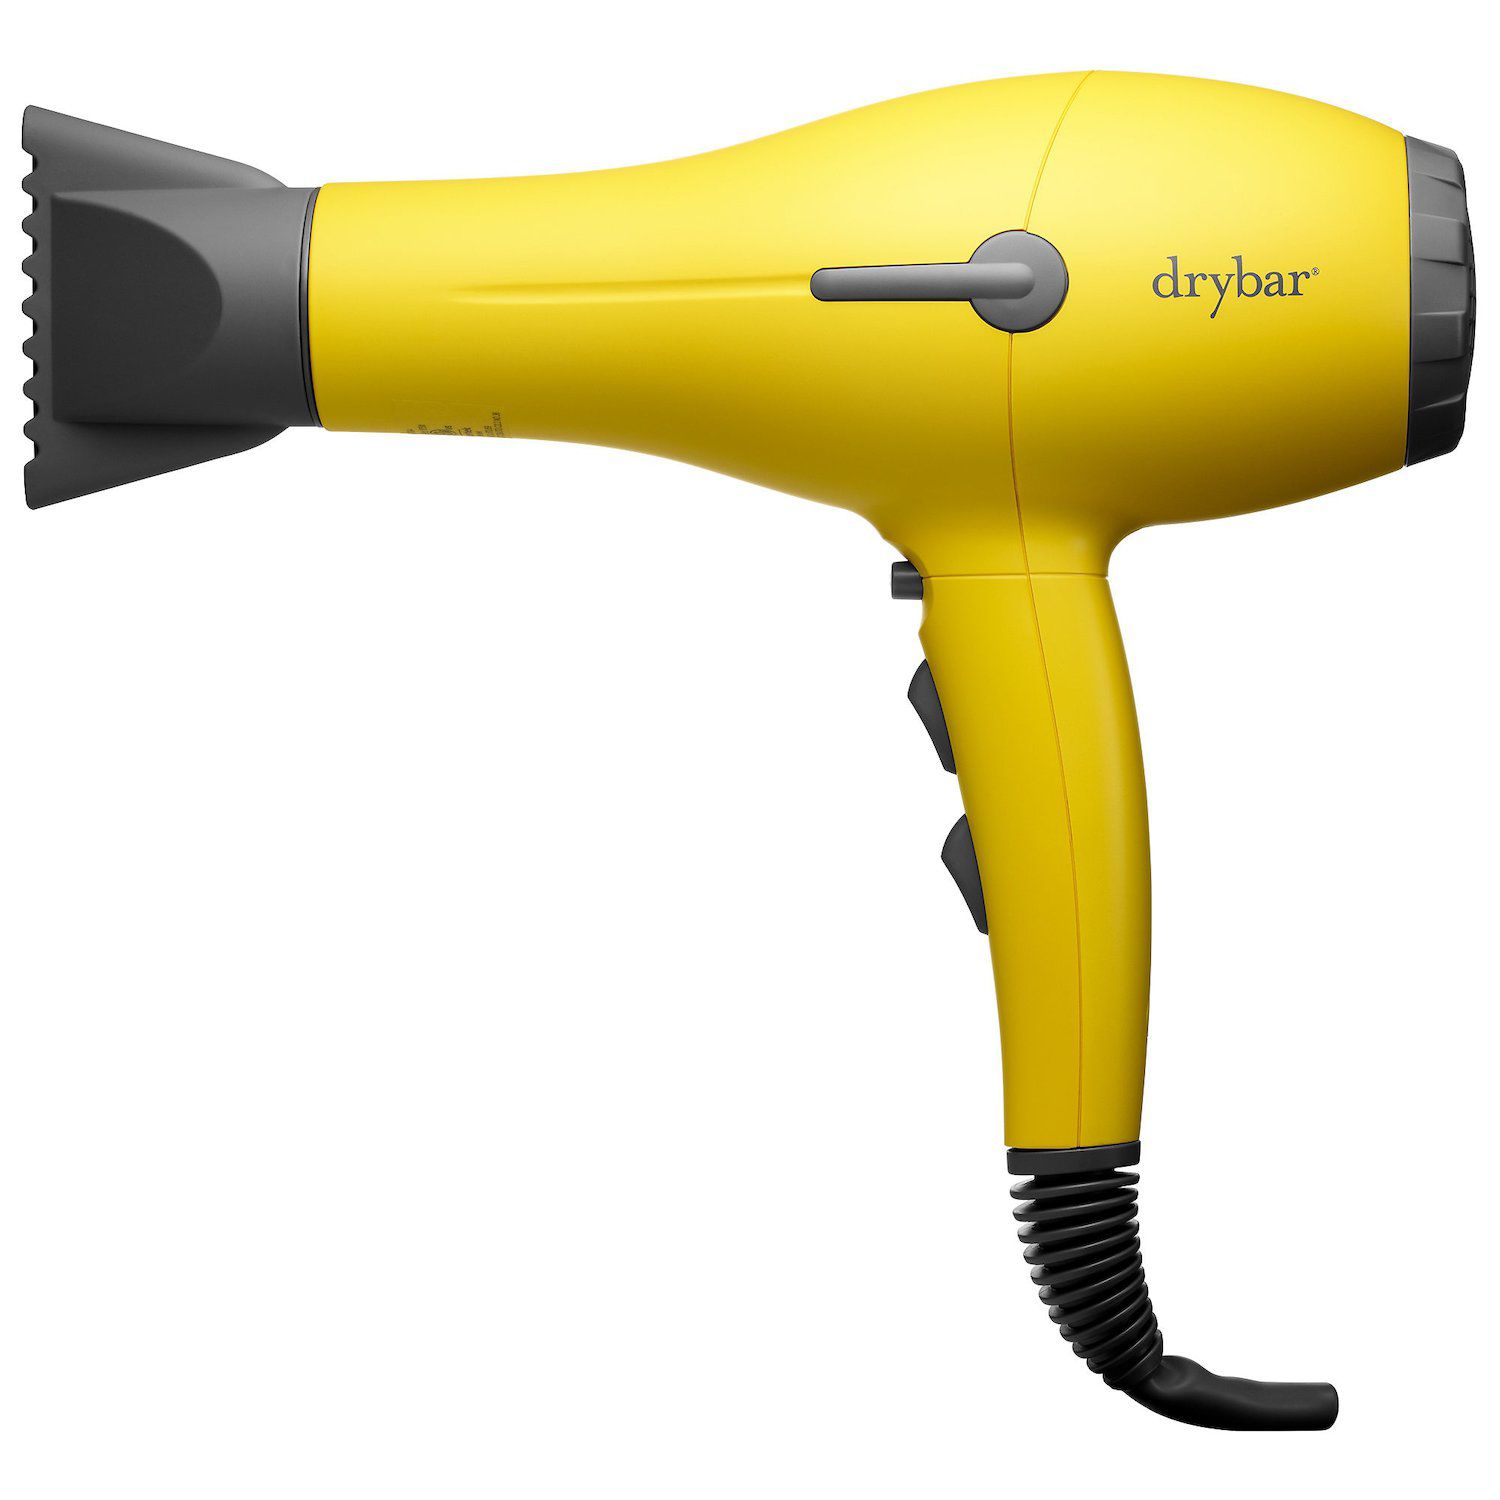 Image for Drybar Buttercup Blow-Dryer at Kohl's.